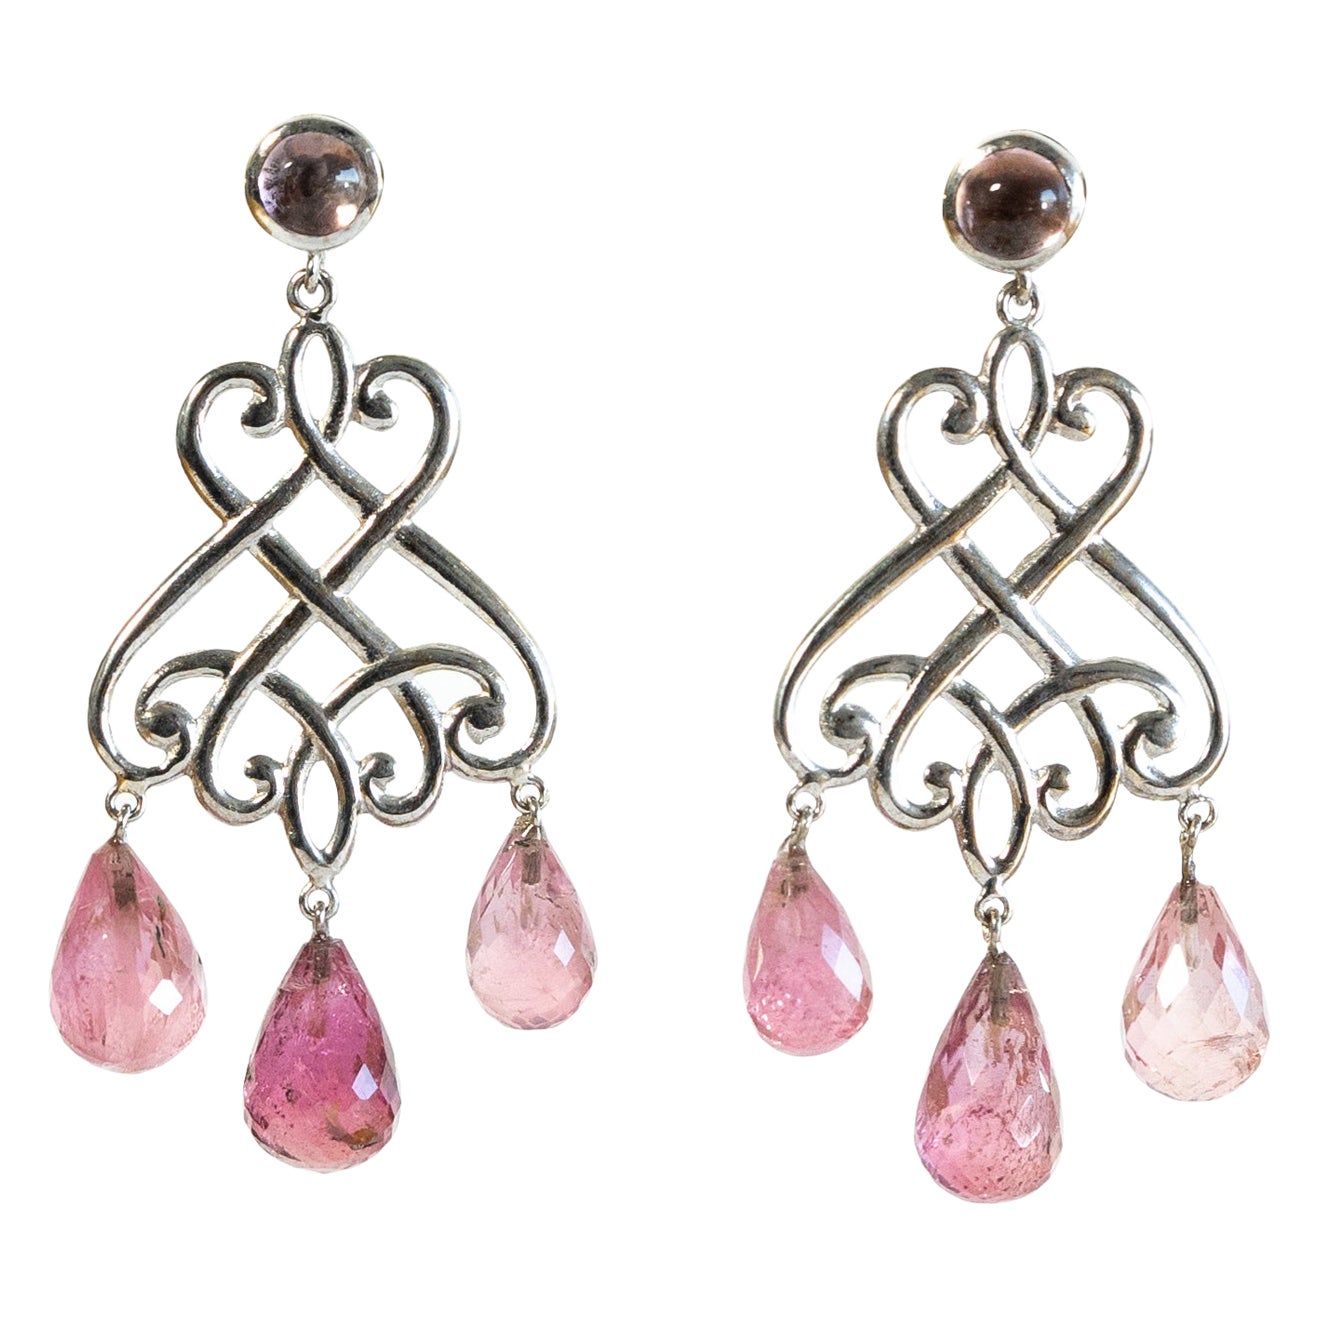 18K White Gold Chandelier Earrings Set with Tourmalines Cabochons and Briolettes